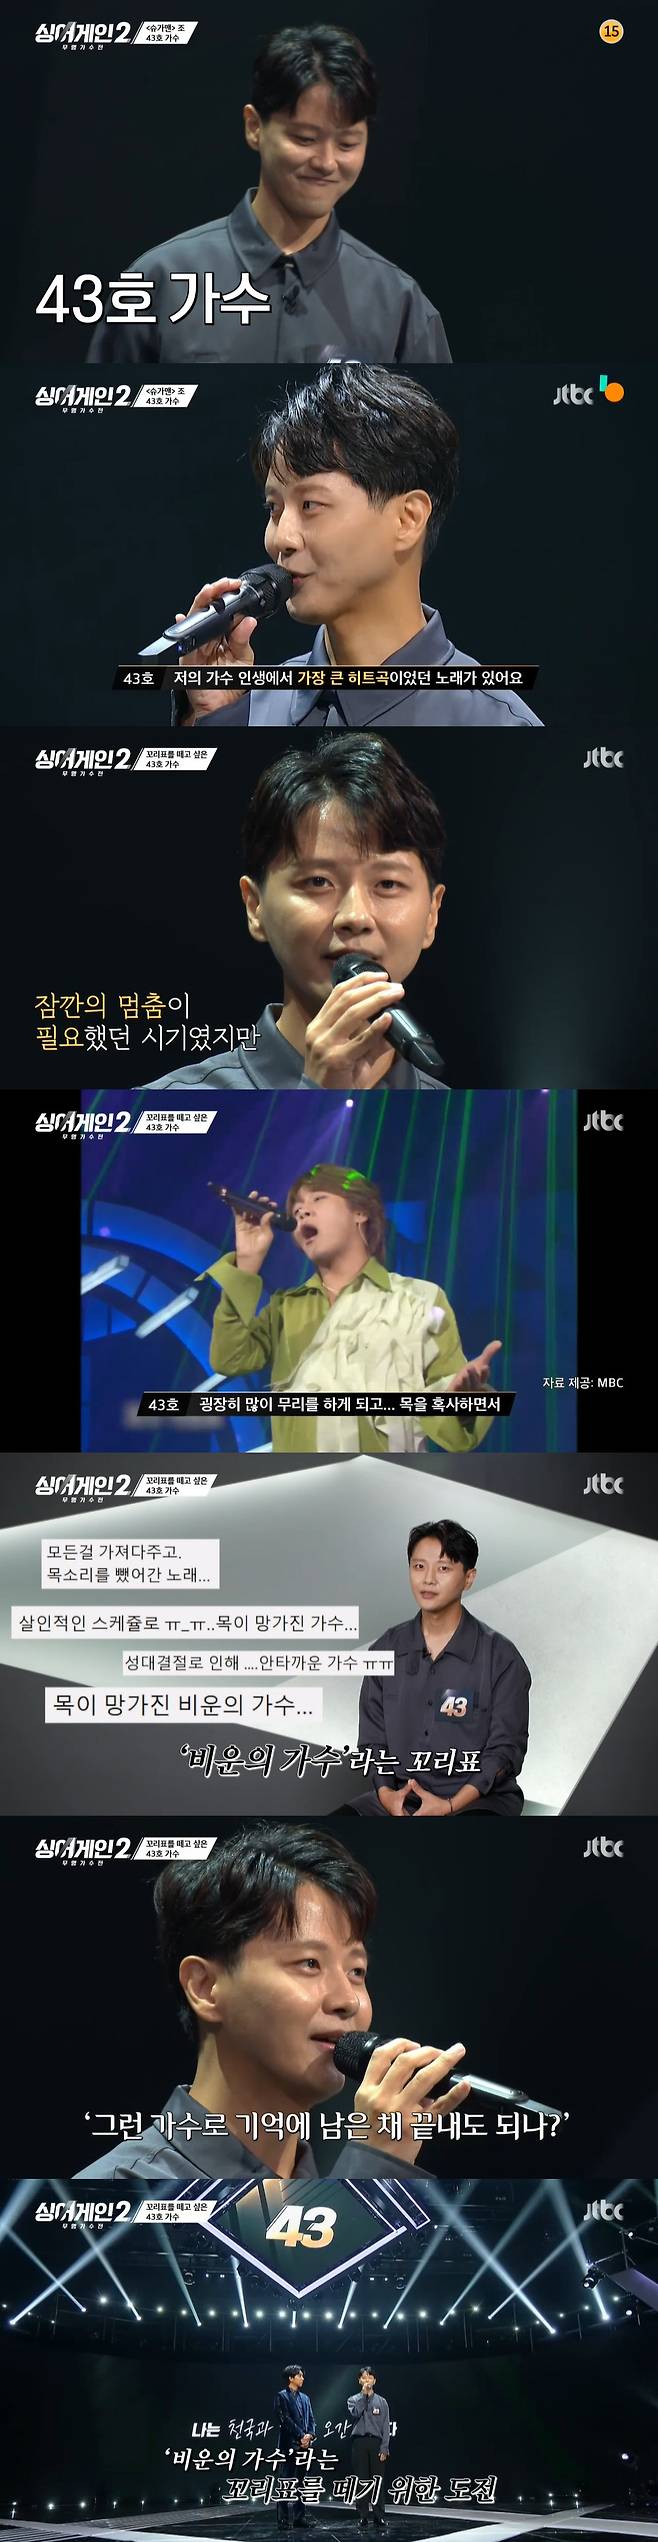 Sing Again 2 consecutive ALL Again came out for the first time in season 2.JTBCs Sing Again Season 2-Unknown Singer (hereinafter referred to as Sing Again 2), which was broadcast on the 13th, depicted the survival of the first round of the finals.The 51st Singer appeared on the first day of The Steamless group. The 51st Singer showed Giggs Crazy Love stage, saying, I will show you wholly in the stage.The 51st Singer, who captivated the judges from the first verse, Explosioned the unaffordable tension and advanced to the next round with ALL Again.Boundary No. 1 11 Singer opened Song Chang-siks Tobacco Shop Girl and advanced to the next round with the final 7 Again.Cigarette Shop Girl is a regular song for the Yoon Do Hyun performance, and he praised the fresh arrangement of 11, saying, I called you yesterday.The 64th Singer, the youngest participant in 2002, was awarded the ALL Again in praise of Lee Sun-hees I am only longing for the aftershocks and It was the best stage to express the way our generation had in a natural way.In addition, 64 Singer is a I NEED U dance of BTS, which has also attracted another charm, making the judges chaos.OST group performed the stage with my OST song, and 62 Singer opened the 1999 drama Youth Trap OST, which recorded 53.1% of TV viewer ratings at the time of broadcasting.7 62 Singer who advanced to the next round with Again.At that time, You Hee-yeol said, There is a song more famous than this song. 62 Singer surprised the judges with the hip and the opposite of youths overtones.48 Singer was released in 2014 Discovery of Love OST Strange, You, and entered the second round with OST first ALL Again.Lee Sun-hee and You Hee-yeol praised the song, saying: You do so well; how can you call live like this?The 23rd Singer, which started singing as the first stage to stand as a song with a house, was enthusiastic about the OST Round and Round of the drama Dokkaebi, but unfortunately it was eliminated as the final 2 Again.Singer in Jeonju is the Singer in the 20th Singer is Singer who sings only Jeonju.The judges who heard the fact that they were changing, the OST of the drama Memories in 2010, gave ALL Again to the sound of the 20th Singer.When the 12th Singer appeared in the Jayas Kosu group, the Simshi members were confused.No. 12 Singer said, I have been trying to mourn and try my own music in Indy God, but I have received Feelings that are buried in reality. I found myself compromised and fleeing, and I came out with the intention of stepping into Jungle. He said.12 Singer was defeated by Kim Kwang-jins truth and unfortunately 2 Again.The identity of 12th Singer was Yoon Duk-won, vocalist of even the band Broccoliner. It was a difficult Top Model.I also felt Jungles coolness once again.  I would like to tell many people who are worried about themselves with distrust like me, Lets stick with Music and lets live together.17 Singer has advanced to the second round with ALL Again with a powerful wake up of Kim Kwang Suk.Yoon Do Hyun praised 17th Singer who kindly led to the hard rock world, saying, There was nothing wrong with the pronunciation.34 Singer was introduced as Singer who was Mrs. Hee-yeol and made the judges sulk.Singer No. 34 said, I was a huge fan of You Hee-yeol in high school.I was called Mrs. Hee-yeol at school, and I heard you Hee-yeols radio and dreamed of Lee Su-hyun.34 Singer said: Ive had 300 performances in the year before Corona, last year I couldnt perform anything, I didnt make a living.I was worried about where I could see Lee Su-hyun, a woman in her 40s, as it is, he said.34 Singer has entered the next round with ALL Again, offering a stage like a performance and a performance of Shinchon Blues Alley Road.When Sara Sugarman group 43 Singer appeared, it was once again a pang.Singer No. 43 said, The song that was the biggest hit in Singers life has a high degree of difficulty: it was loved and loved first place.I worked hard for about a year, but during that period I was in bad shape.At that time, I should have reorganized and looked back on my condition, but I was overworked and overworked my neck, and I had a group of vocal cord nodules. I have a label called Singer of Empty, which my career has ended because I can not manage my neck.43 Singer said, Can I finish with Memory as such Singer?I thought so much that I did not want to be Memory as a singer who failed to the public because I came to Singer because I wanted to show I am such a singer.43 Singer is heartfelt Heaven, and Cho Kyuhyun tears.Unfortunately, the 43rd Singer, who was eliminated by 3 Again, was Singer Kim Hyunsung.It was an idol, a really big fan, it was so touching today, said Cho Kyuhyun, while Kim Ina said, I think you can take off the tails.I think I will wait for the stage of 43 again, no matter how much it is enough to see this stage. Kim Hyunsung said, If you can tell me that you called me Heaven in your 20s, I would like to say Thank you. Again seems to have been a place where I could get energy for a new Top Model.I will try to find my own song and listen to it. 